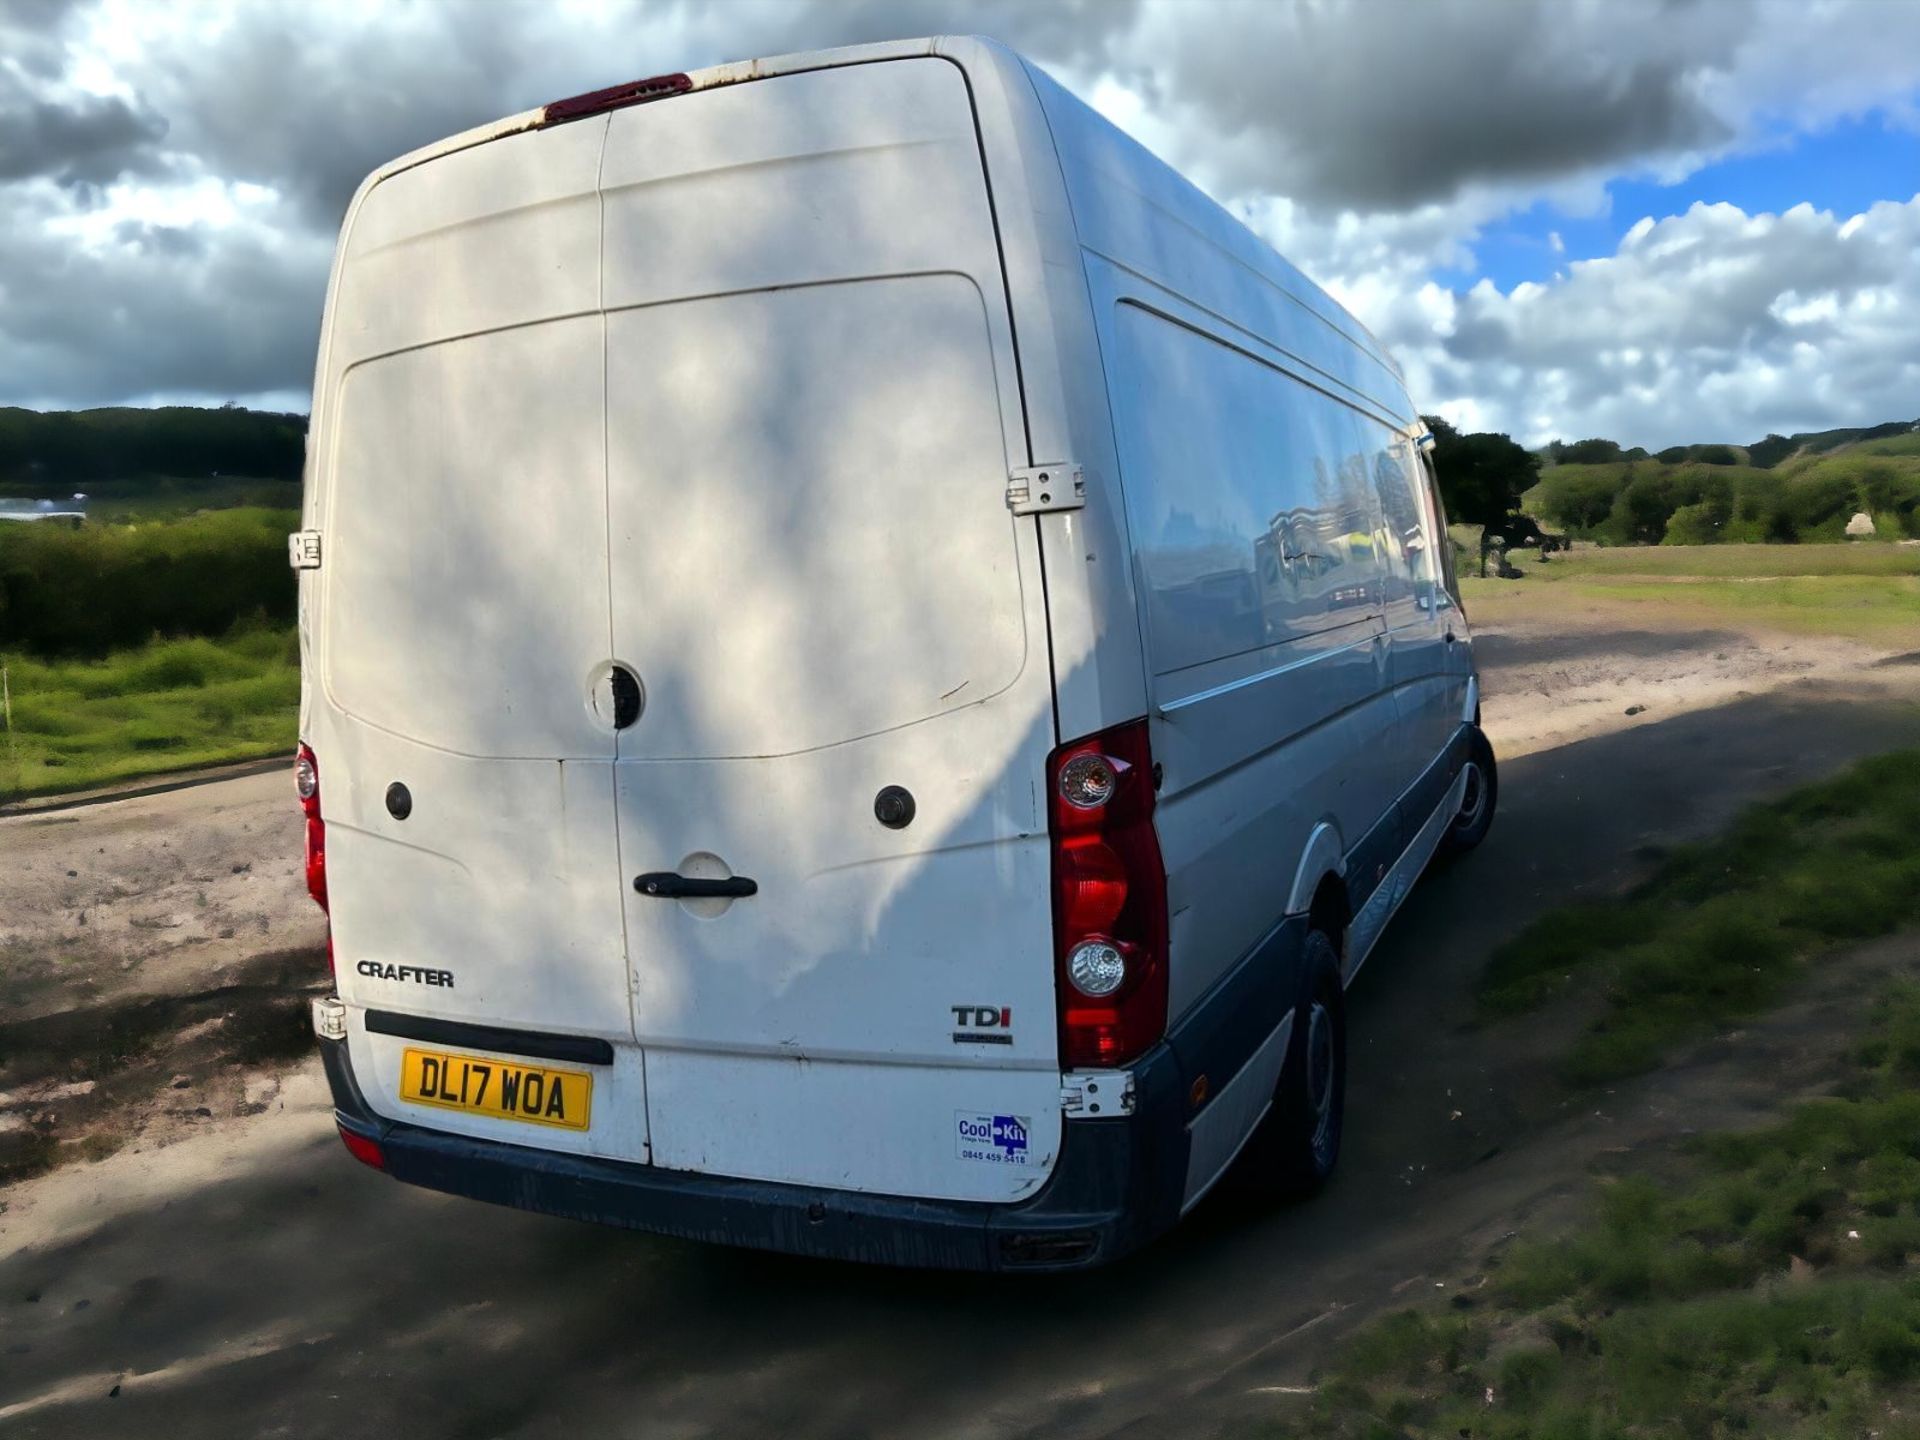 2017 VOLKSWAGEN CRAFTER CR35 TDI DIESEL VAN - NON-RUNNER, ULEZ FREE - HPI CLEAR - READY TO GO! - Image 4 of 6